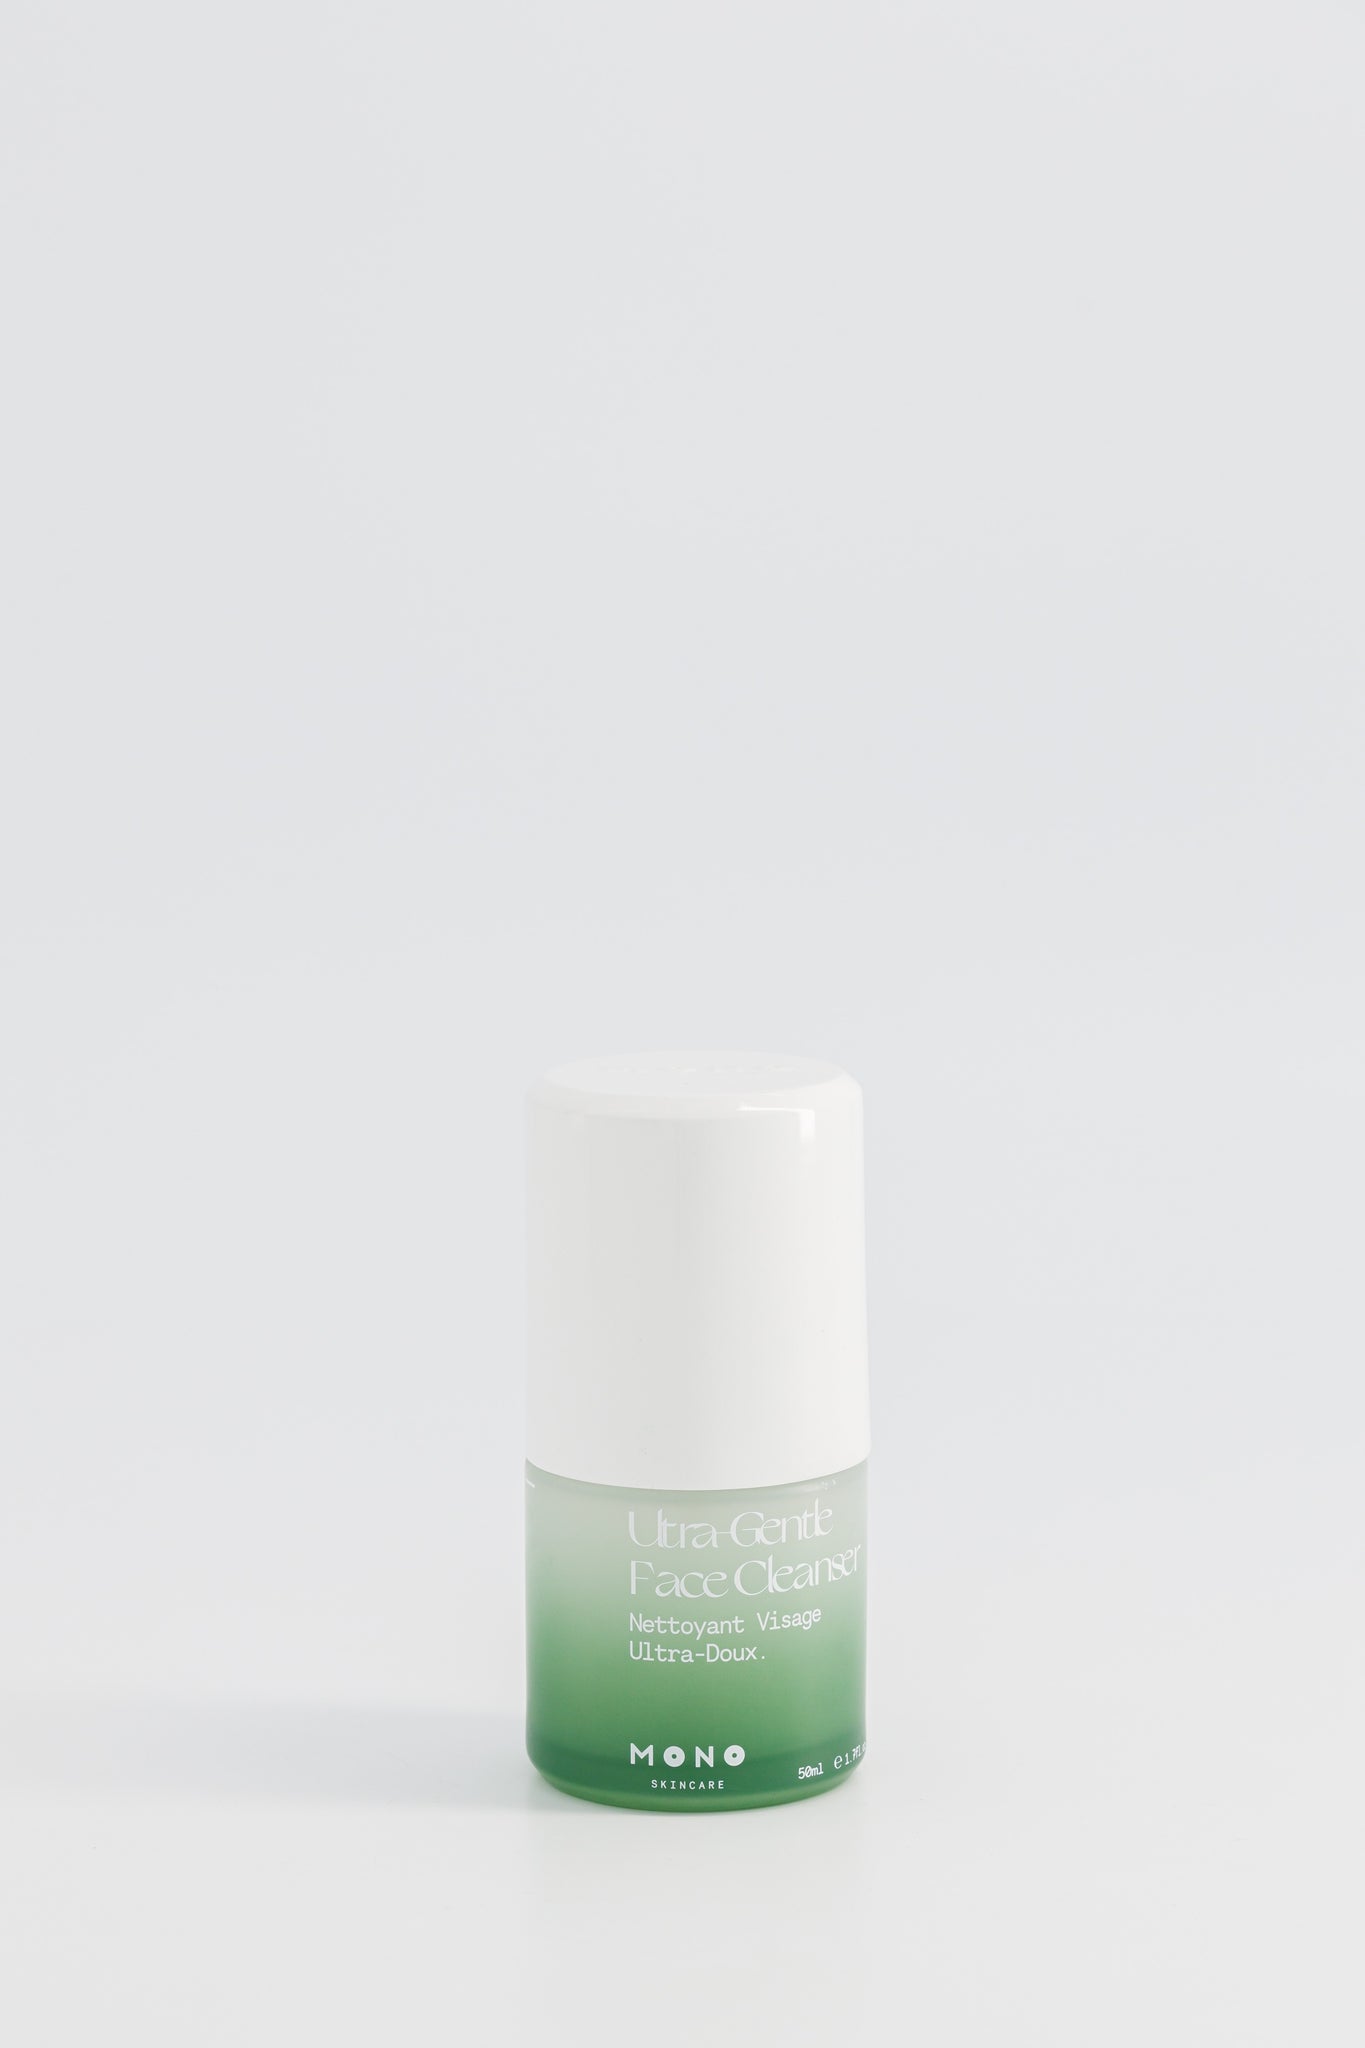 N°1  Ultra-Gentle Face Cleanser - Mono Skincare